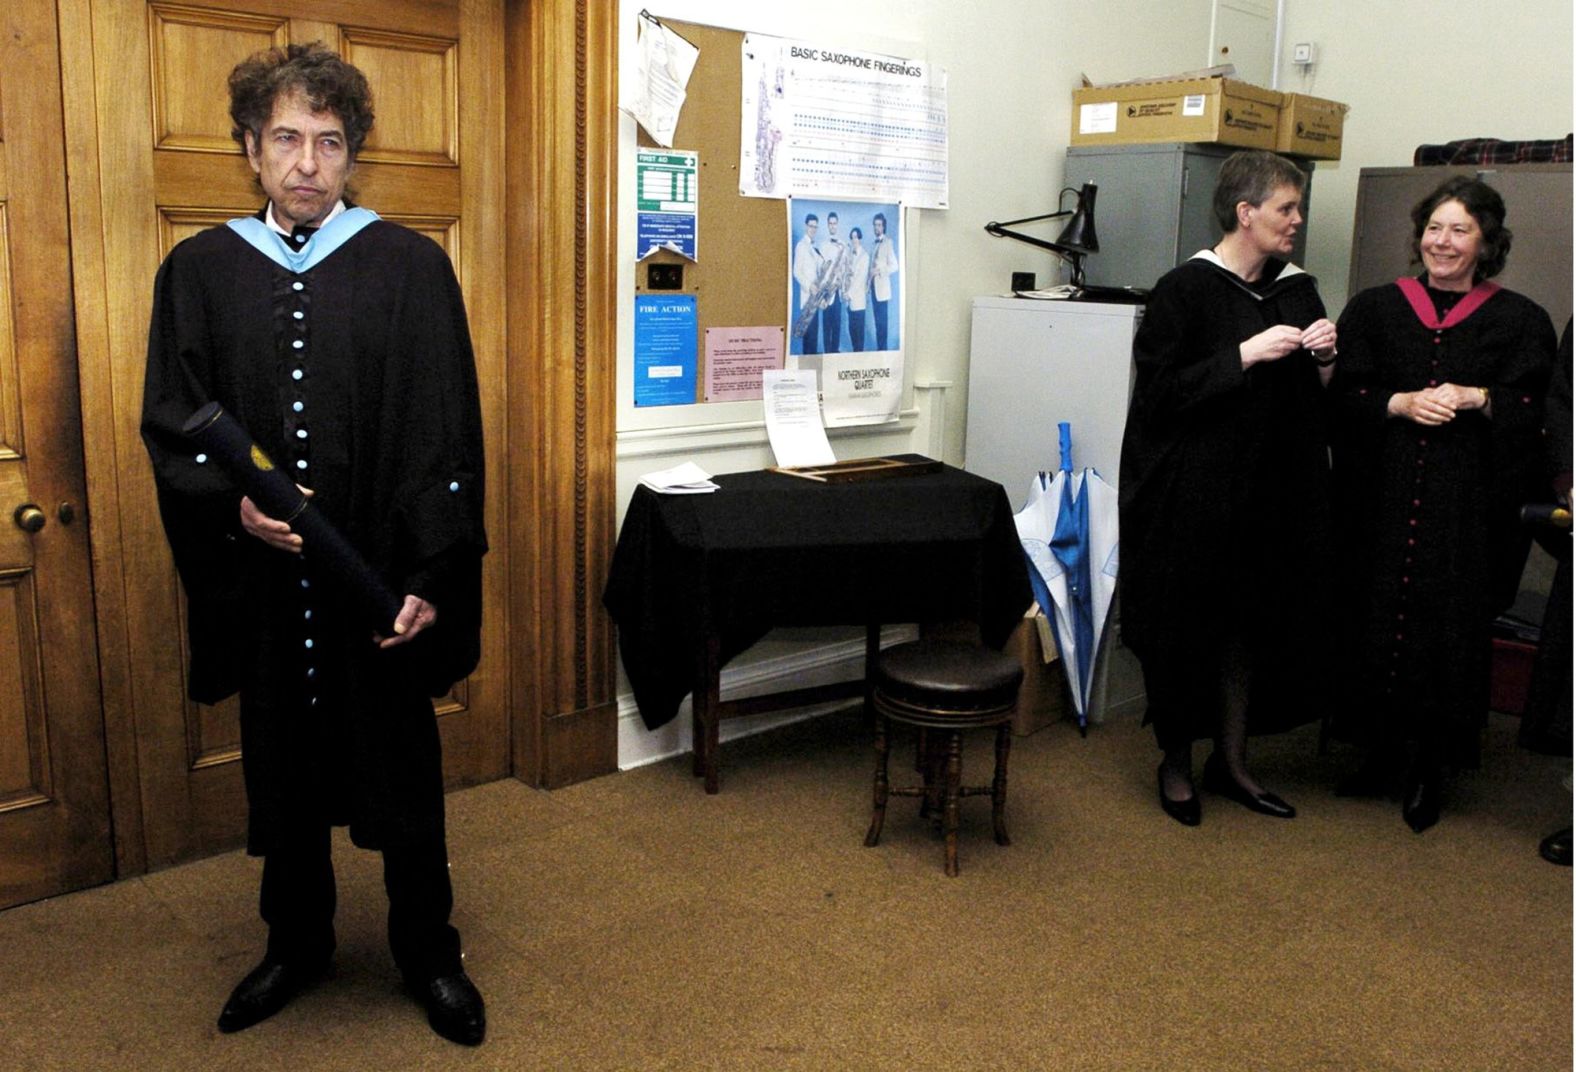 Dylan is seen at the University of St. Andrews in Scotland, where he received an honorary degree in 2004.